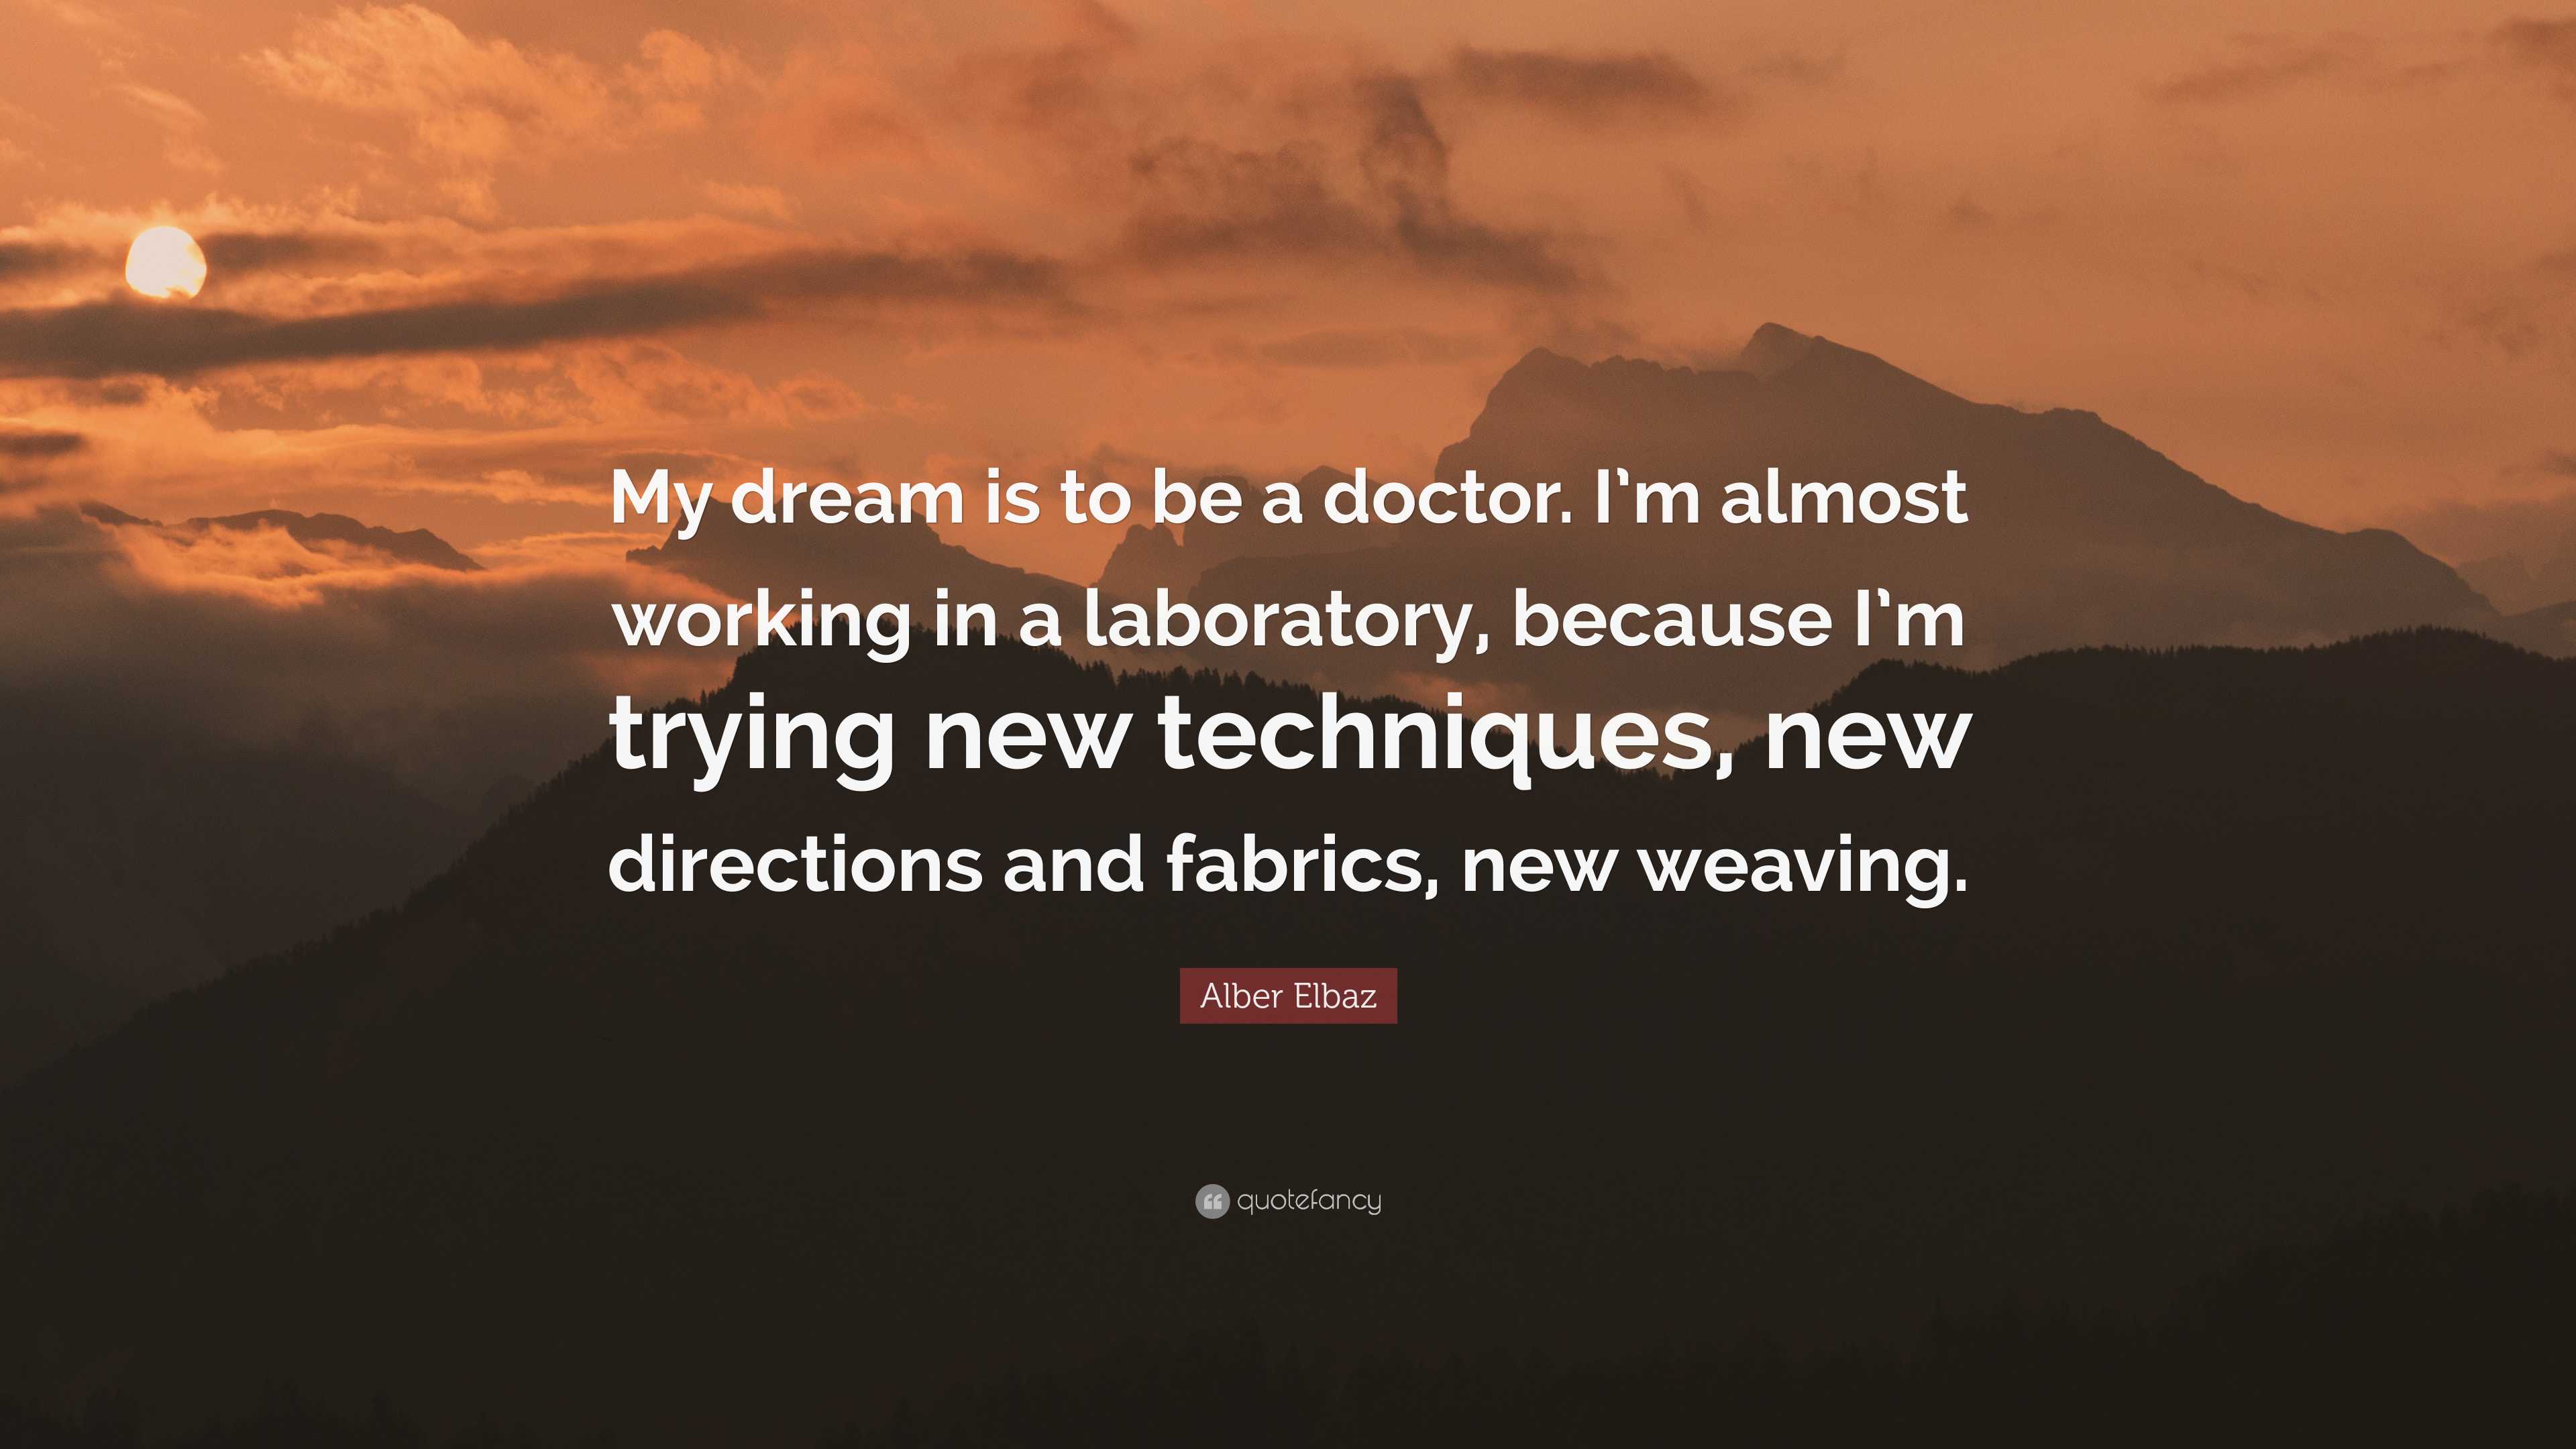 Alber Elbaz Quote: “My dream is to be a doctor. I'm almost working